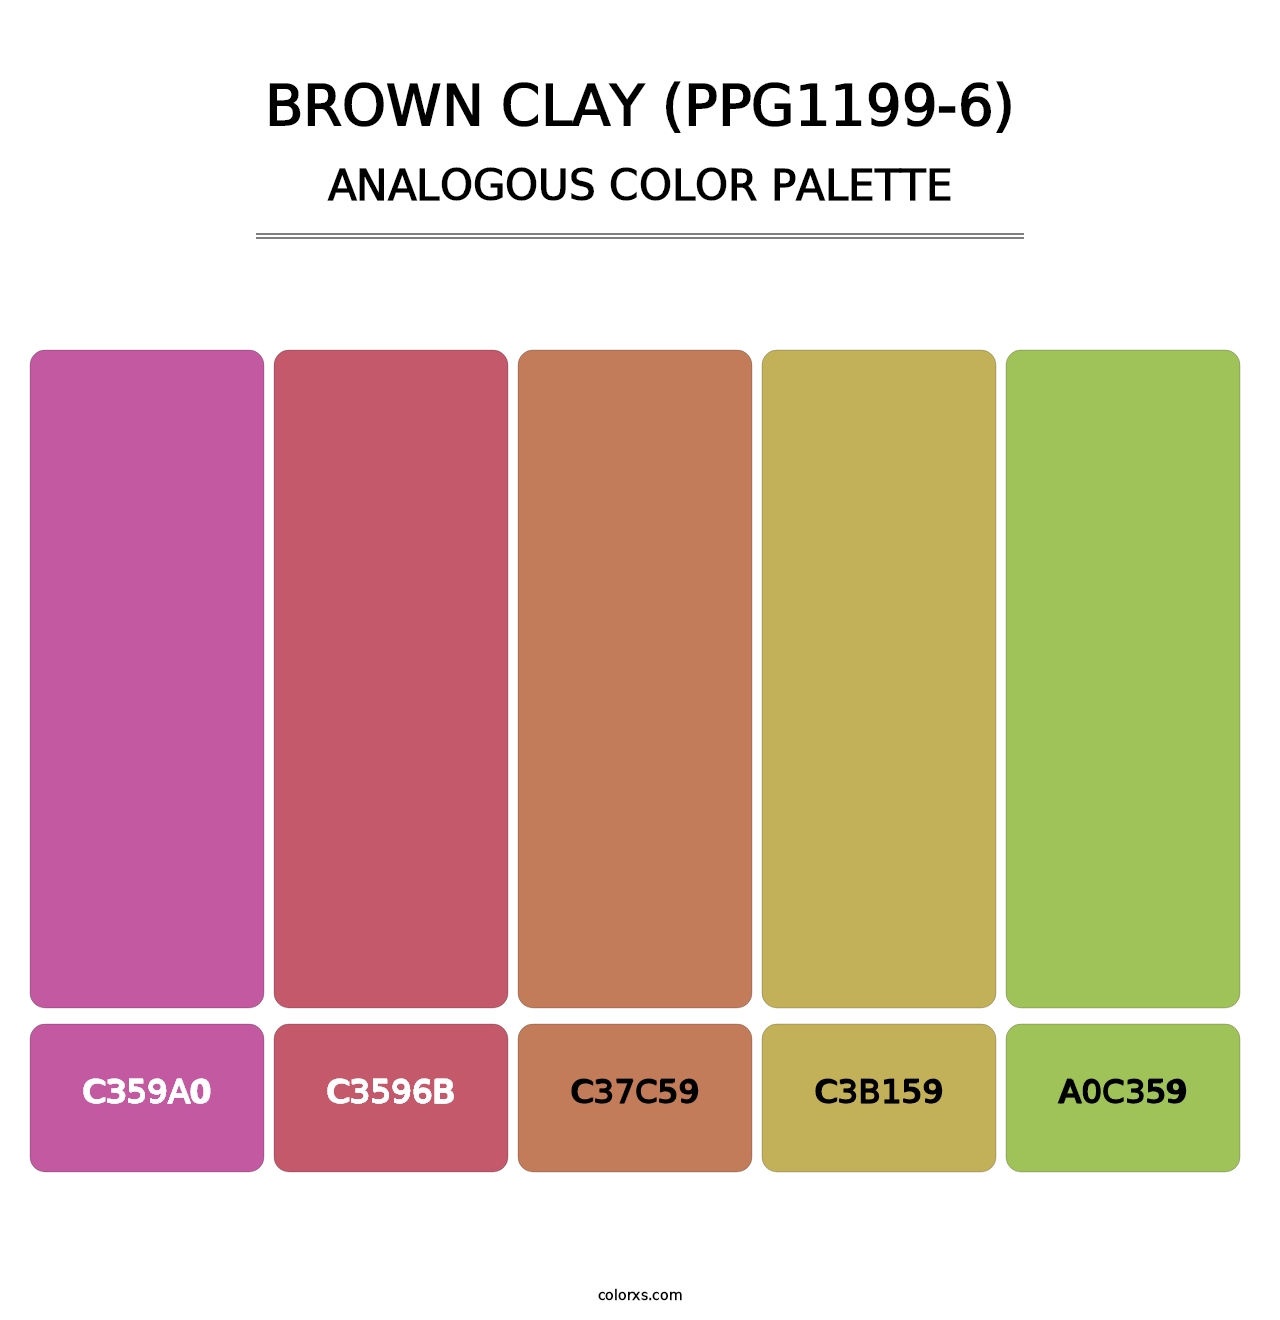 Brown Clay (PPG1199-6) - Analogous Color Palette